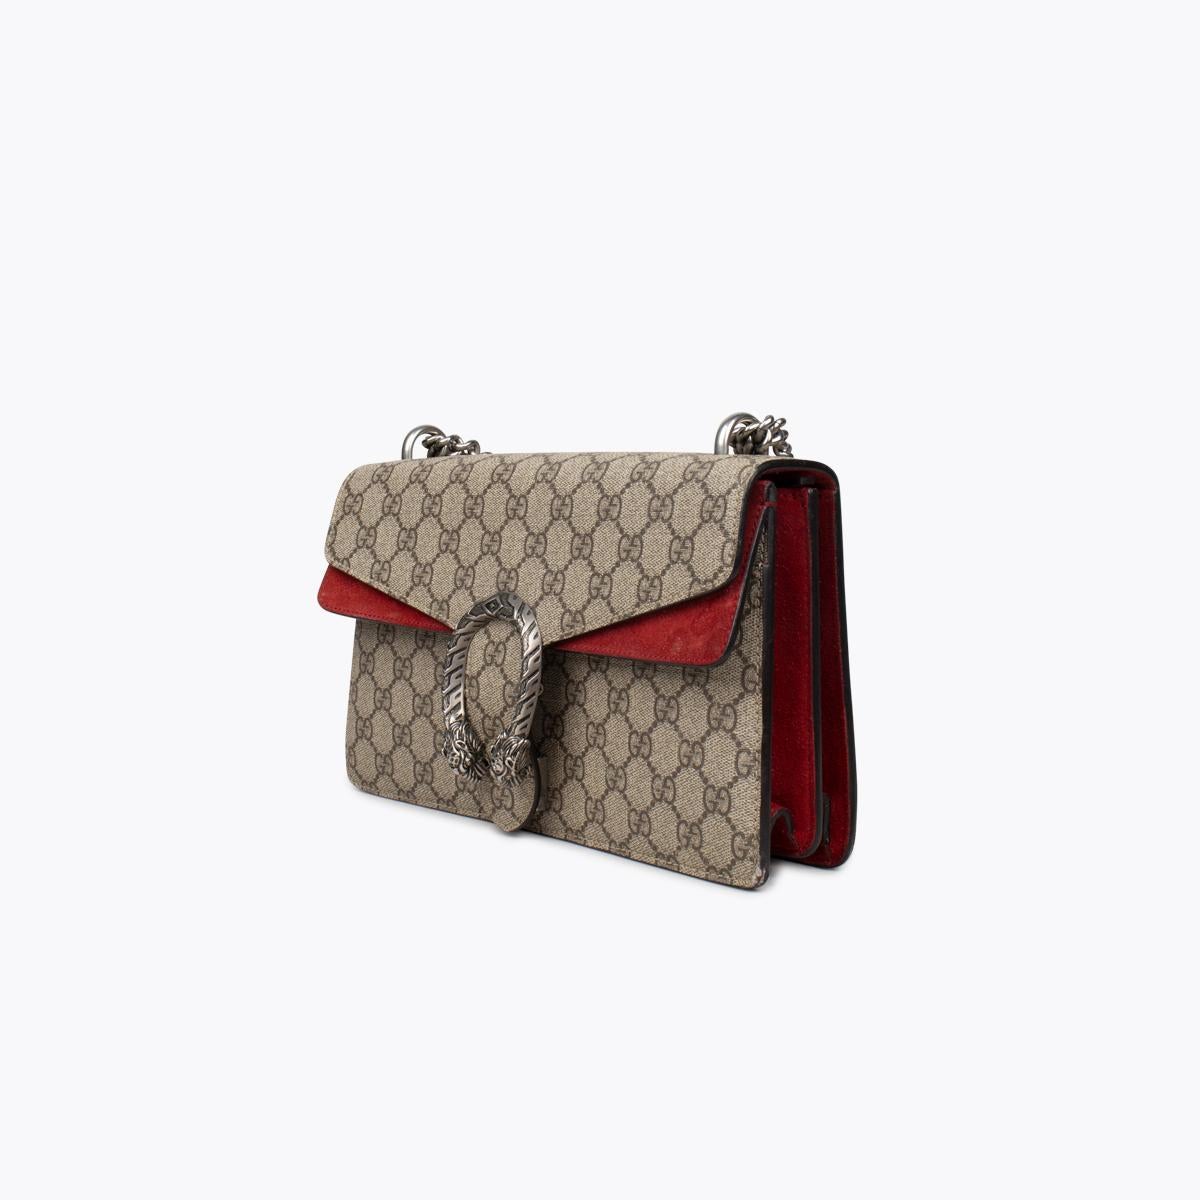 Gucci Medium GG Supreme Dionysus Shoulder Bag

- Neutrals Coated Canvas
- GG Supreme & Dionysus Accent
- Antiqued Silver-Tone Hardware
- Chain-Link Shoulder Strap
- Chain-Link Accents & Dual Exterior Pockets
- Suede Lining
- Push-Lock Closure at